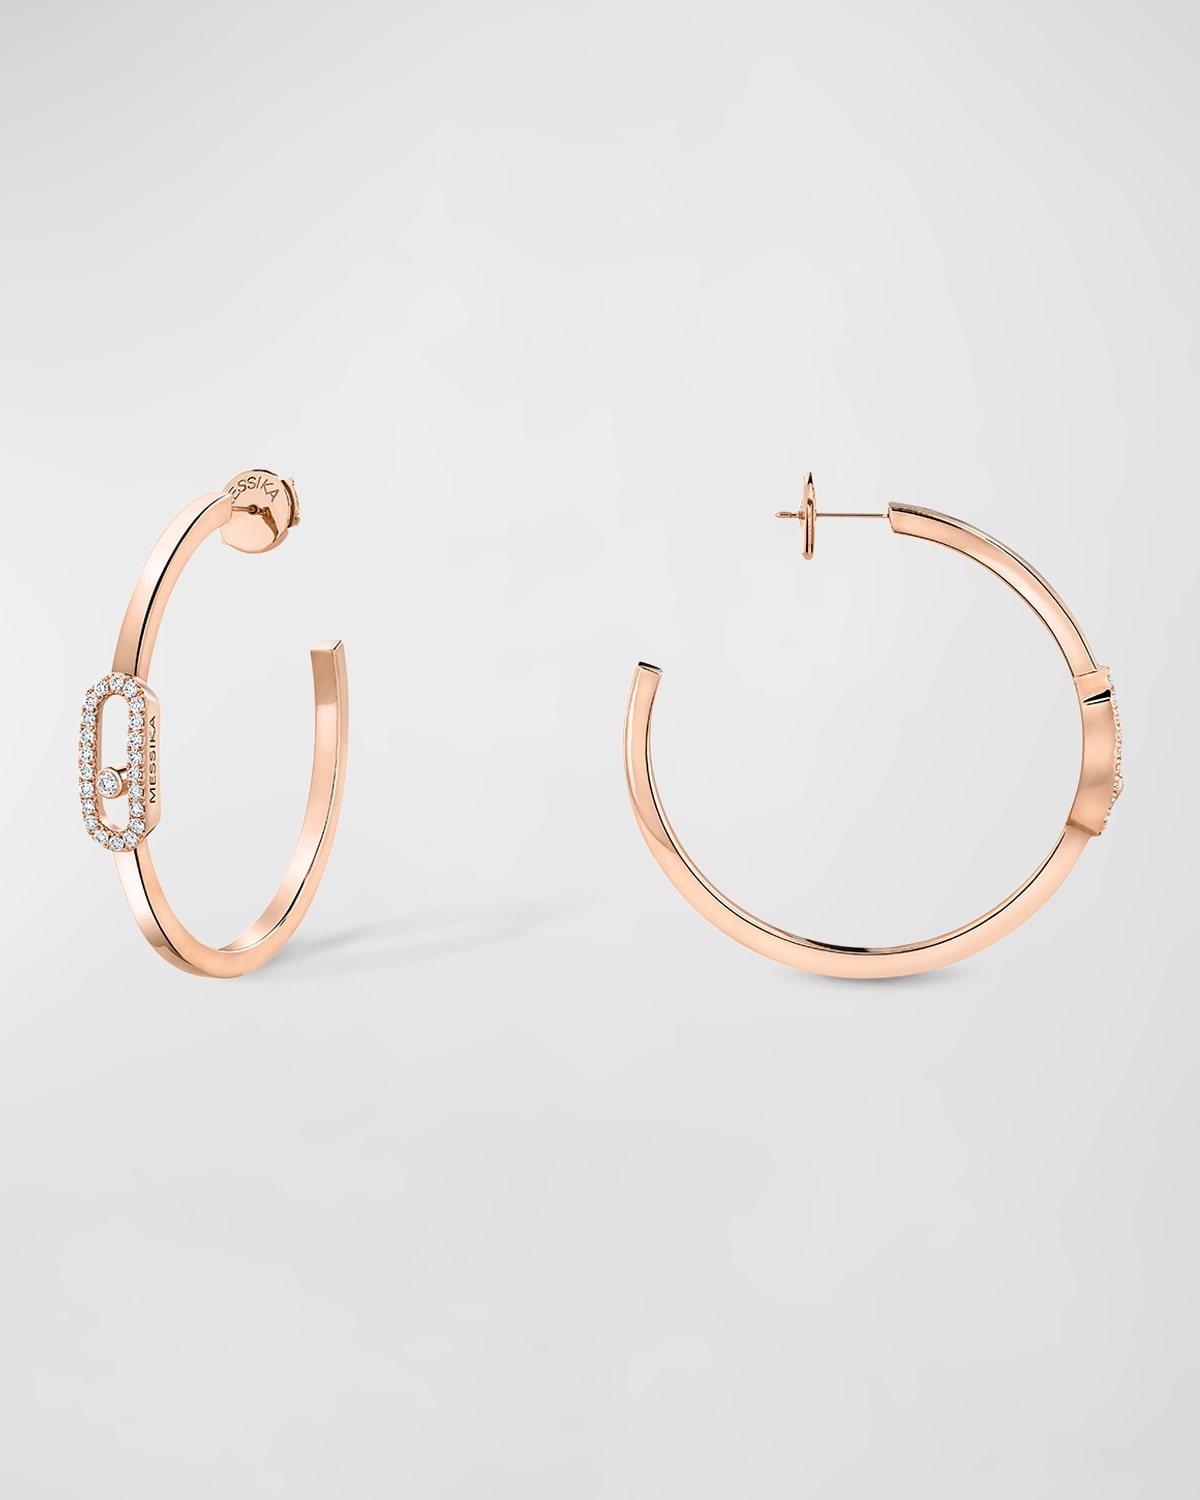 Messika Move Uno 18k Rose Gold Small Hoop Earrings